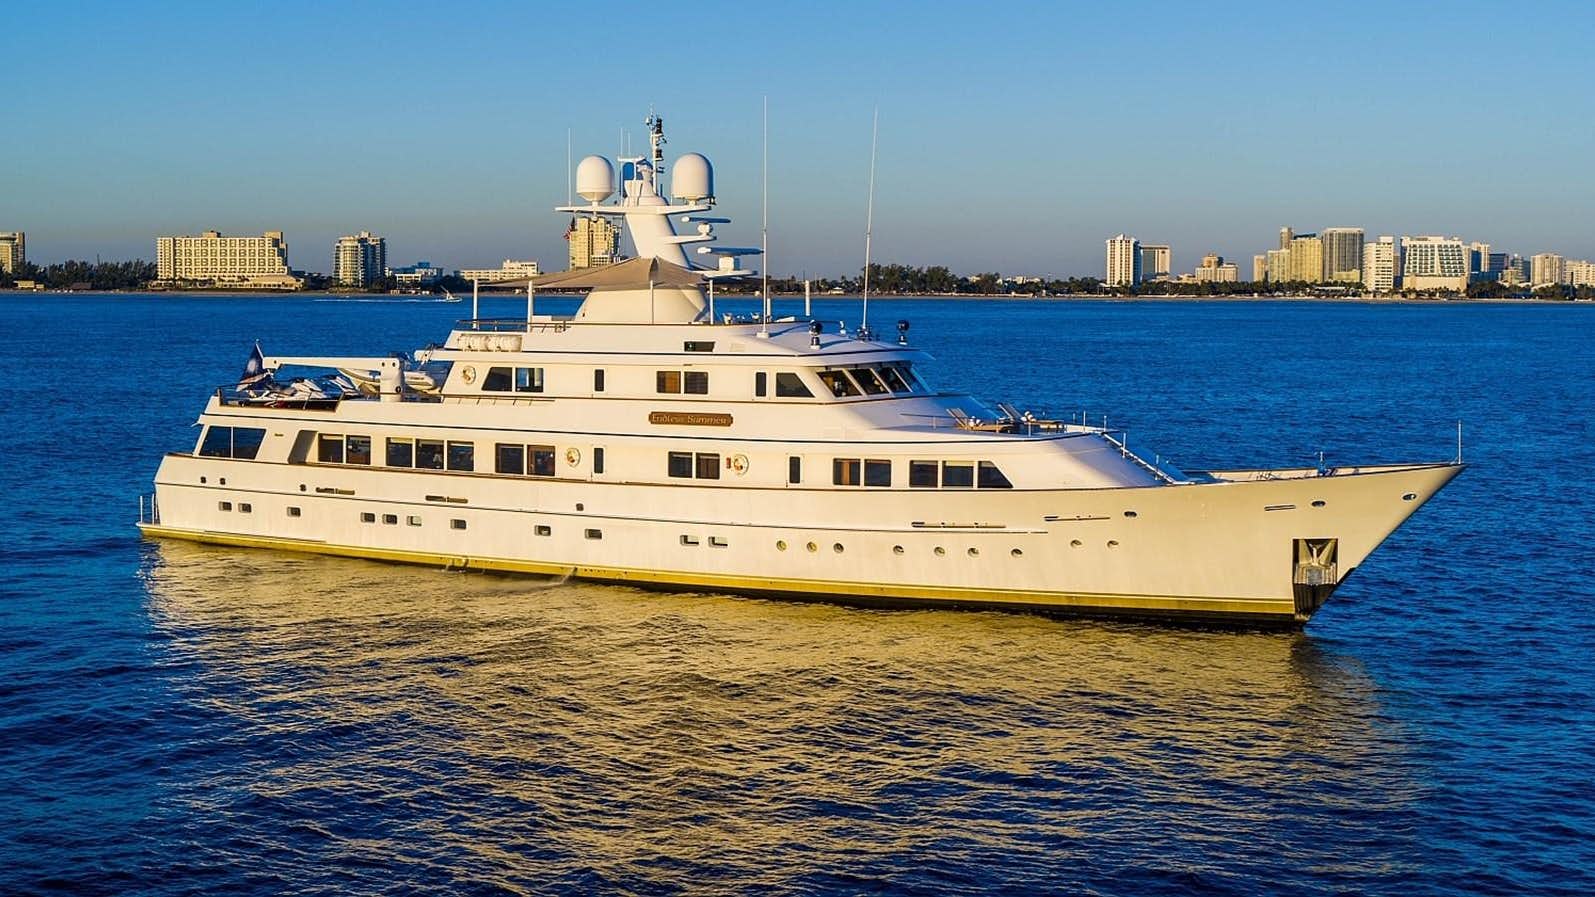 Watch Video for ENDLESS SUMMER Yacht for Sale